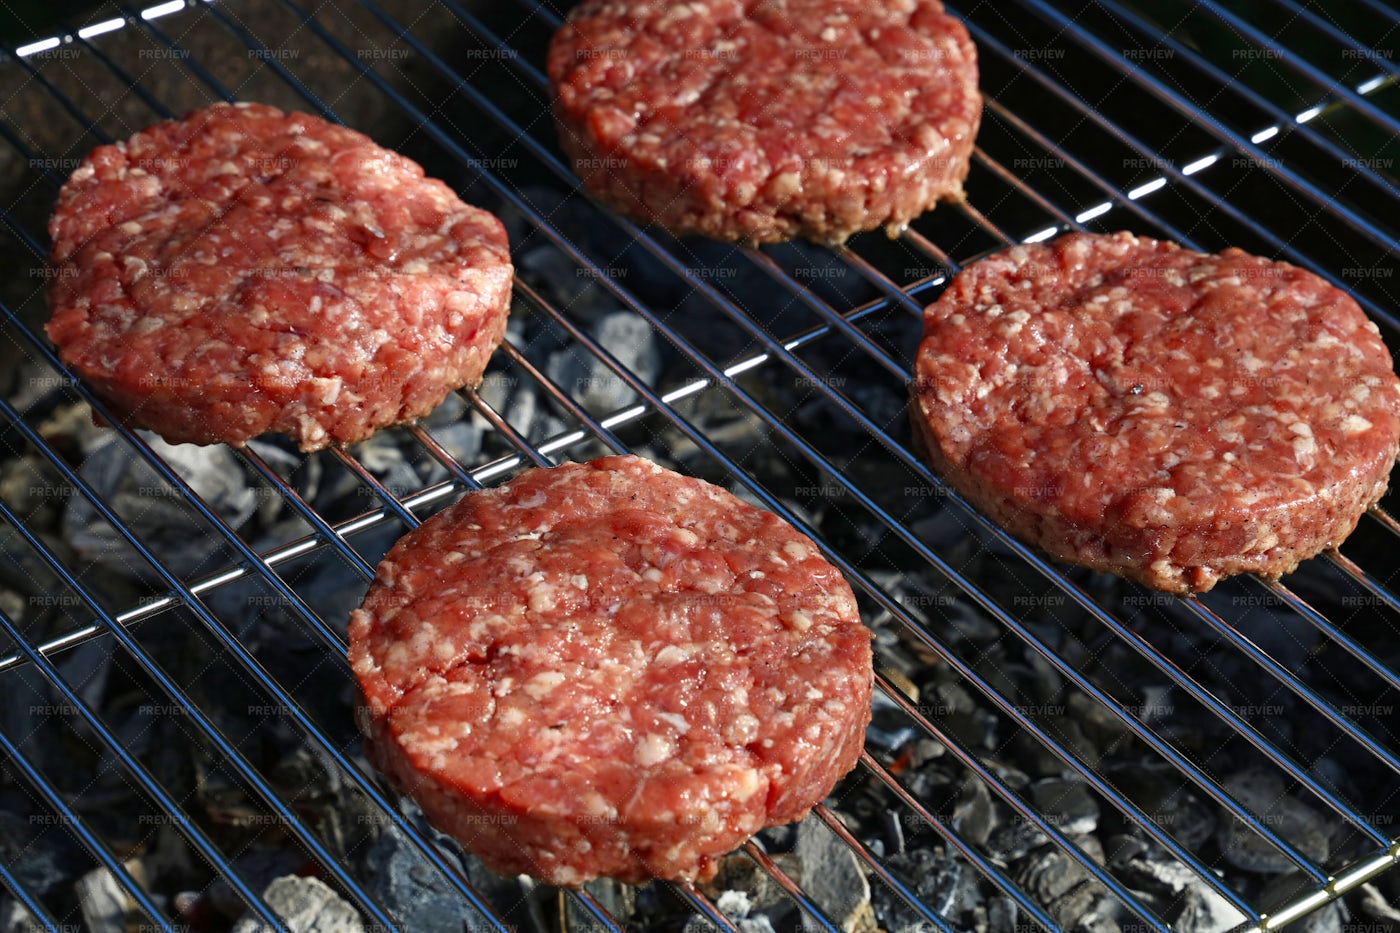 Beef Burgers On The Grill: Stock Photos